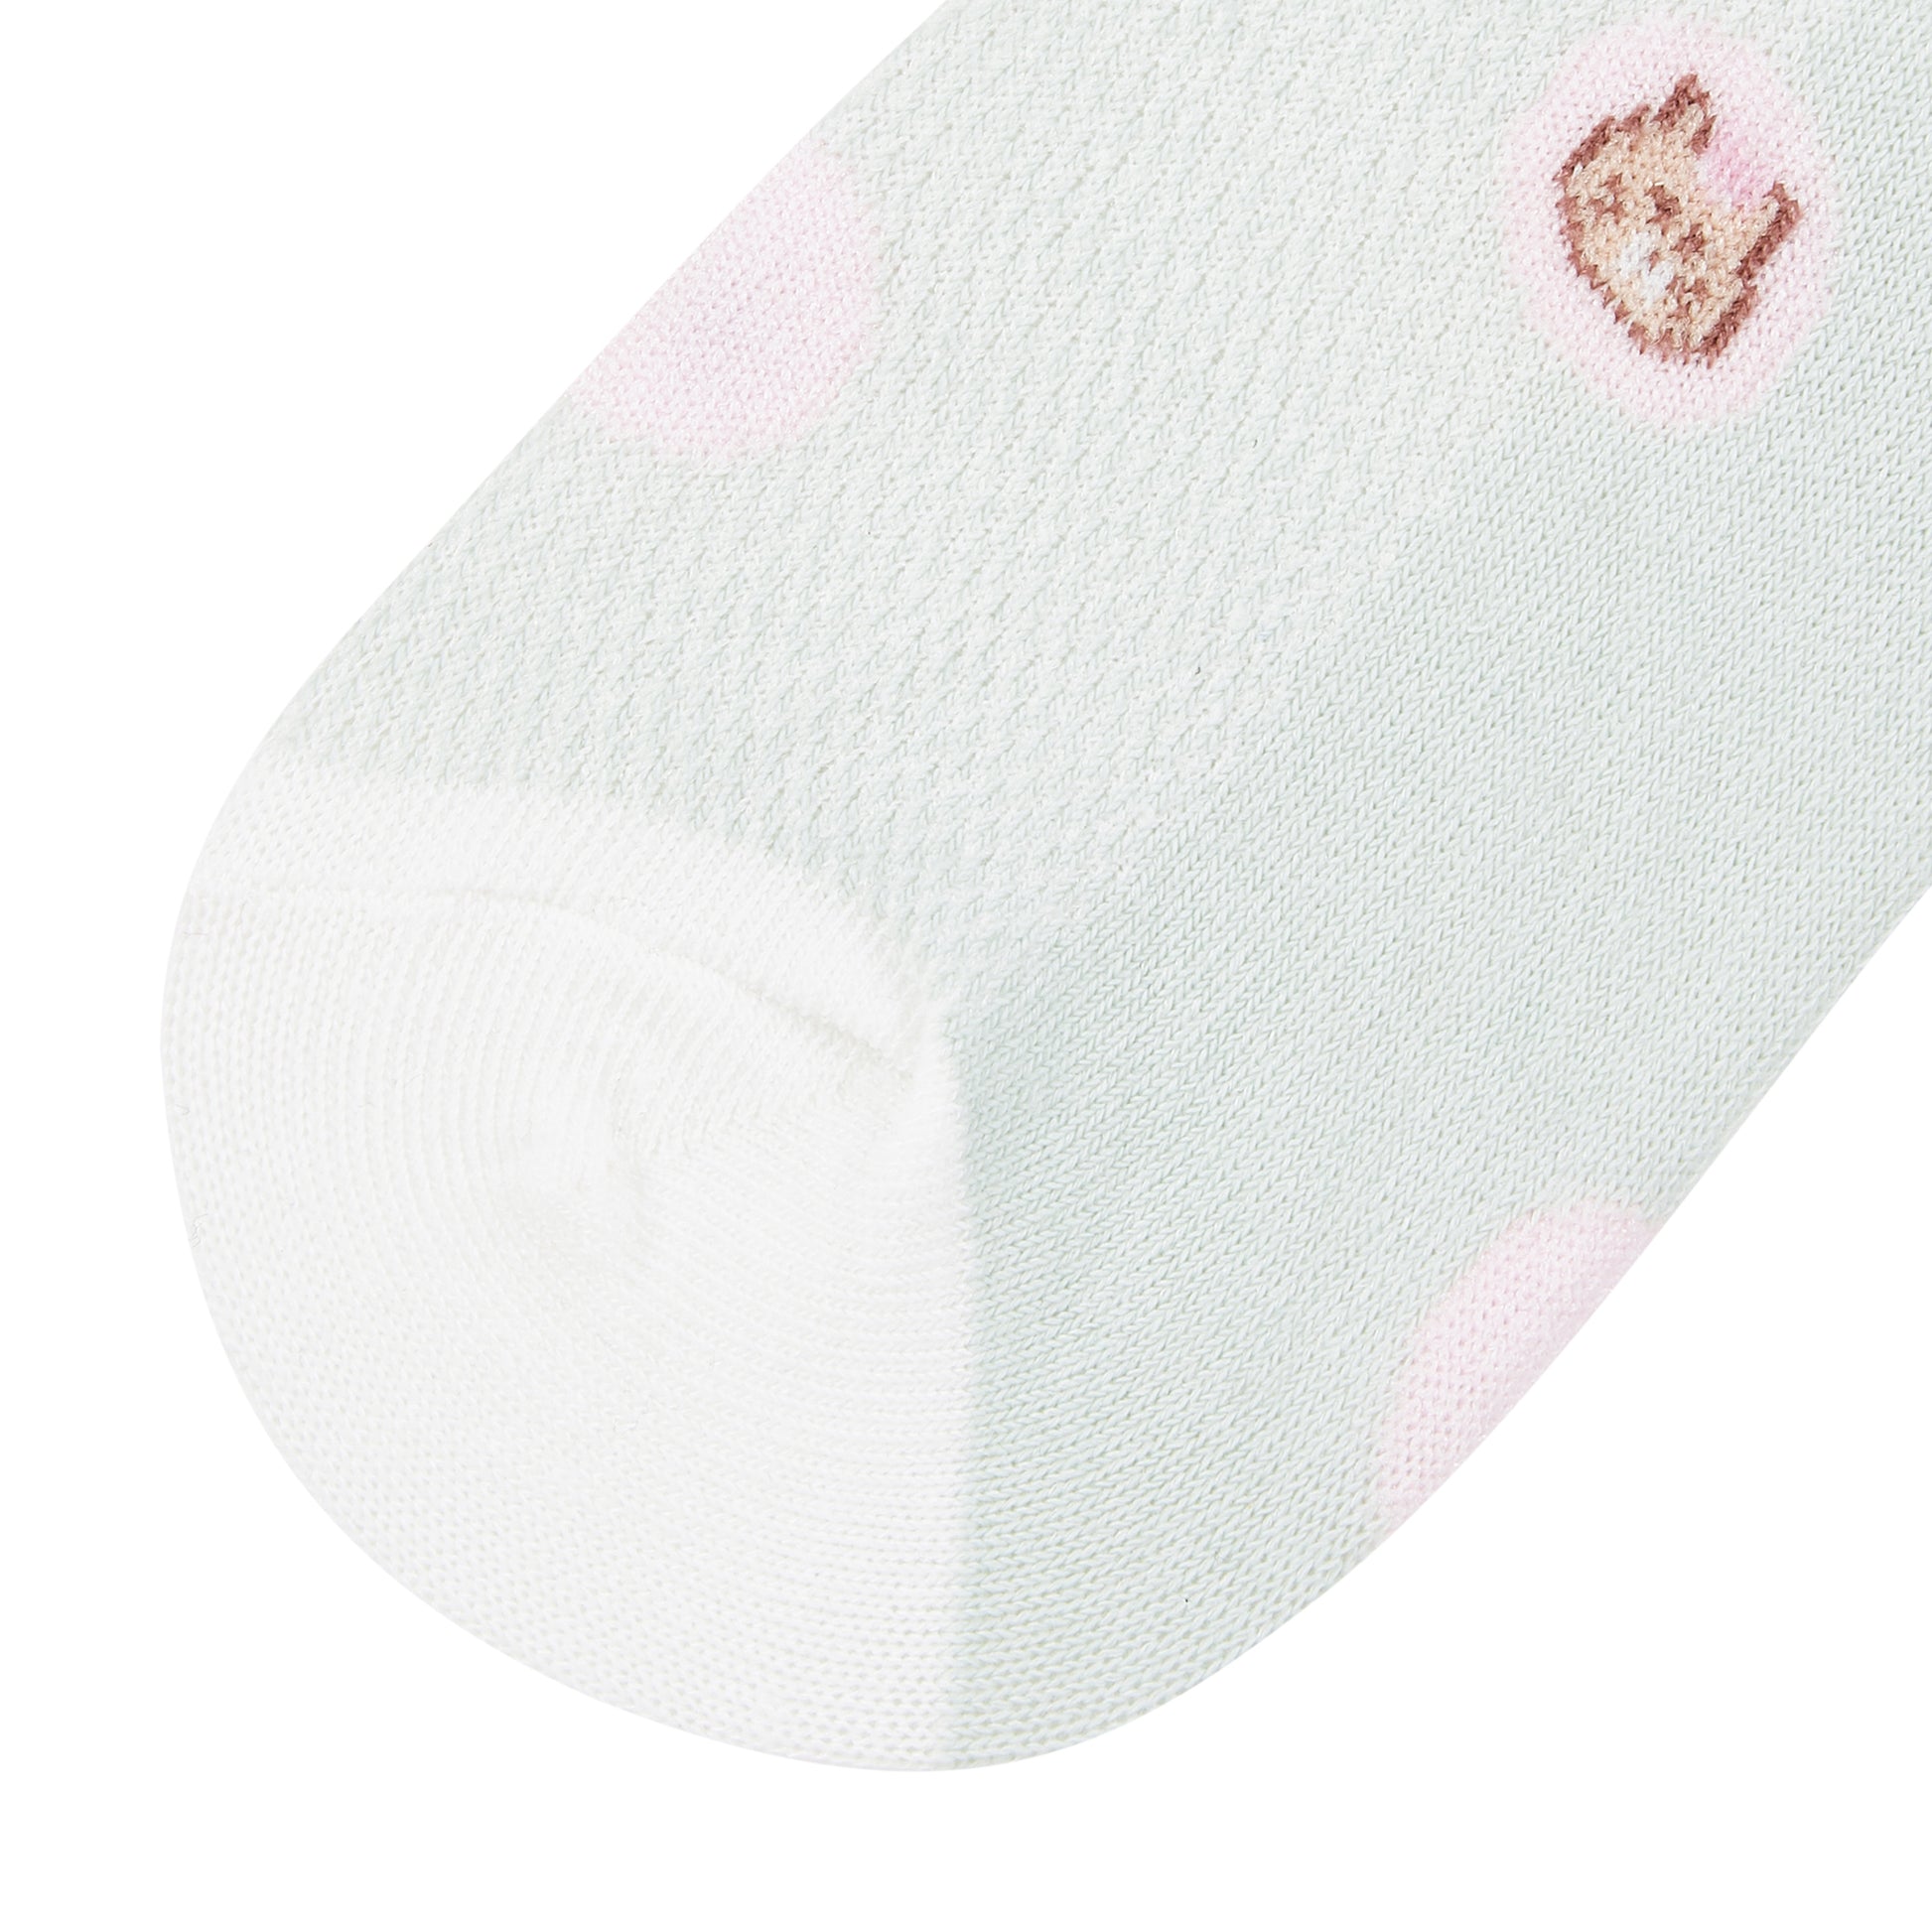 IDENTITY Ladies Mint Green Ankle Length Socks with Cat Pixel Print - IDENTITY Apparel Shop